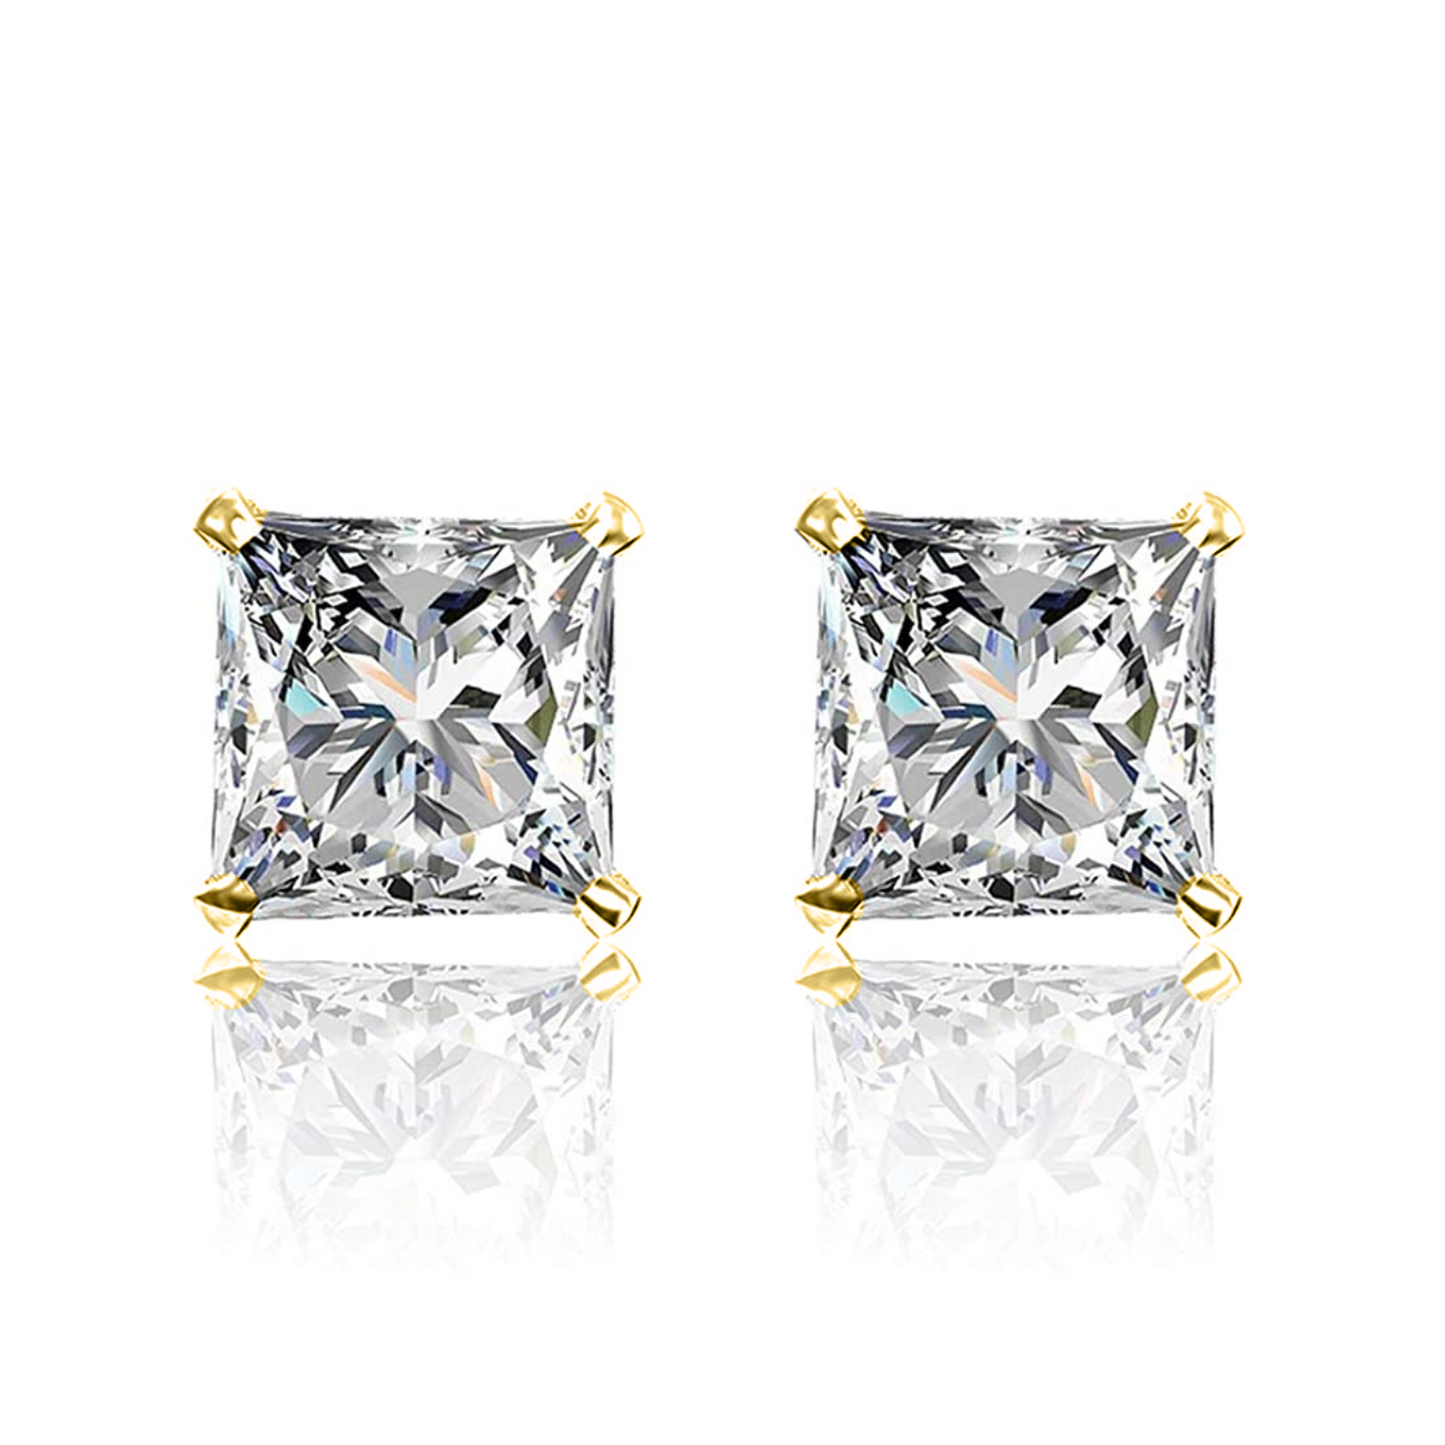 Solitaire Gold Square Stud Earrings in 92.5 Silver - Princess Cut - Brilliant Swiss Zirconia - 18k gold Finish